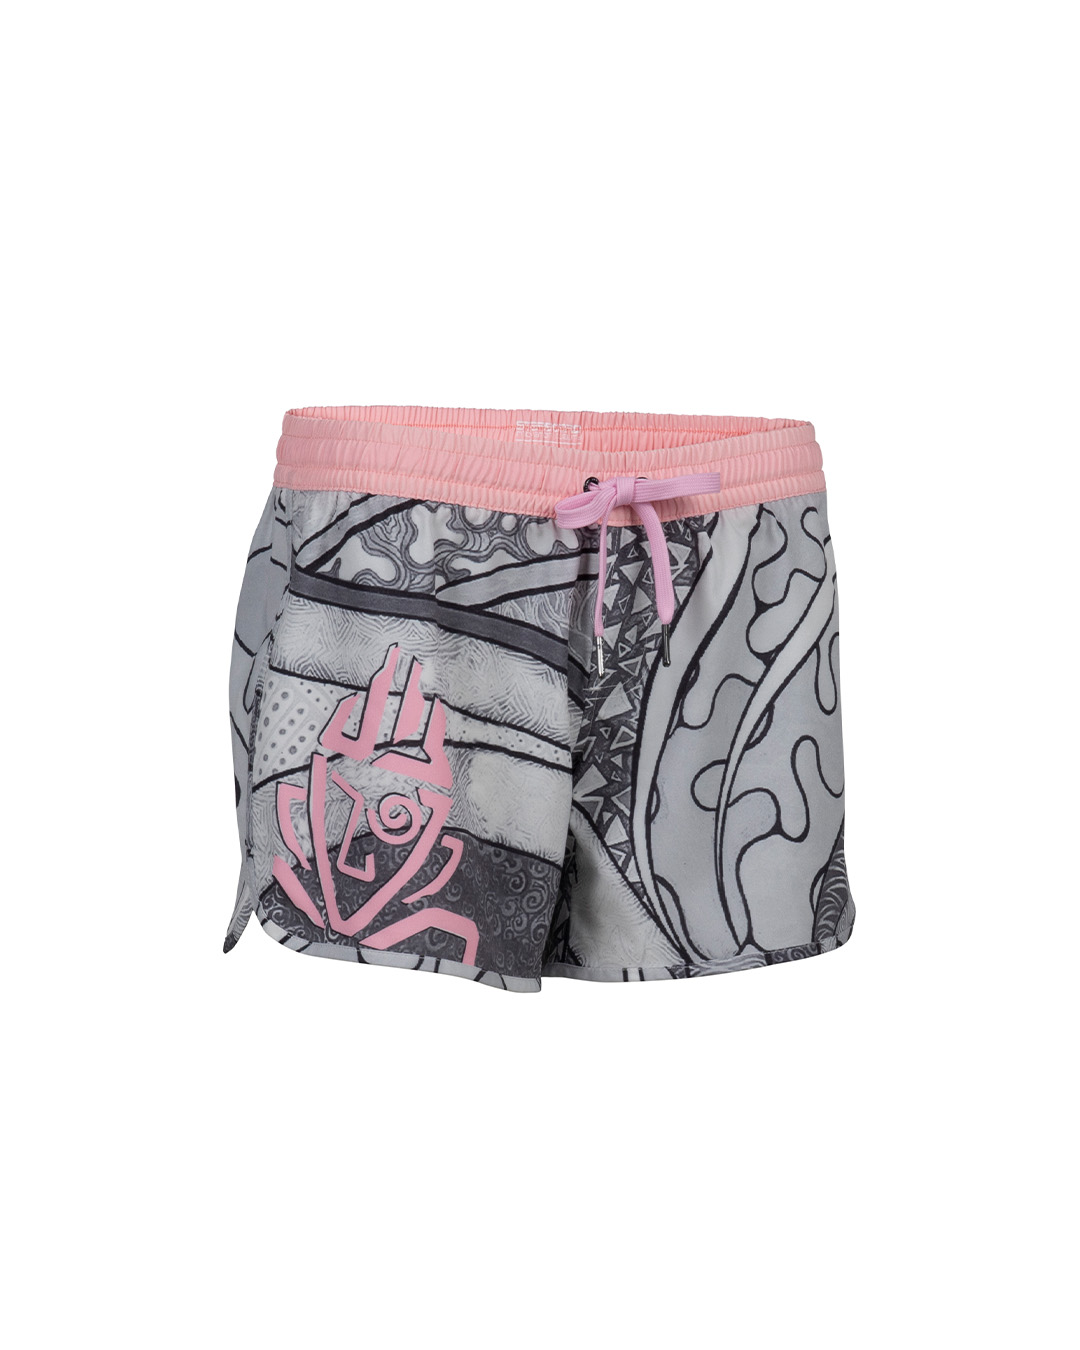 Starboard Girls Sonni Boardshorts - Baby Pink » Starboard Apparel